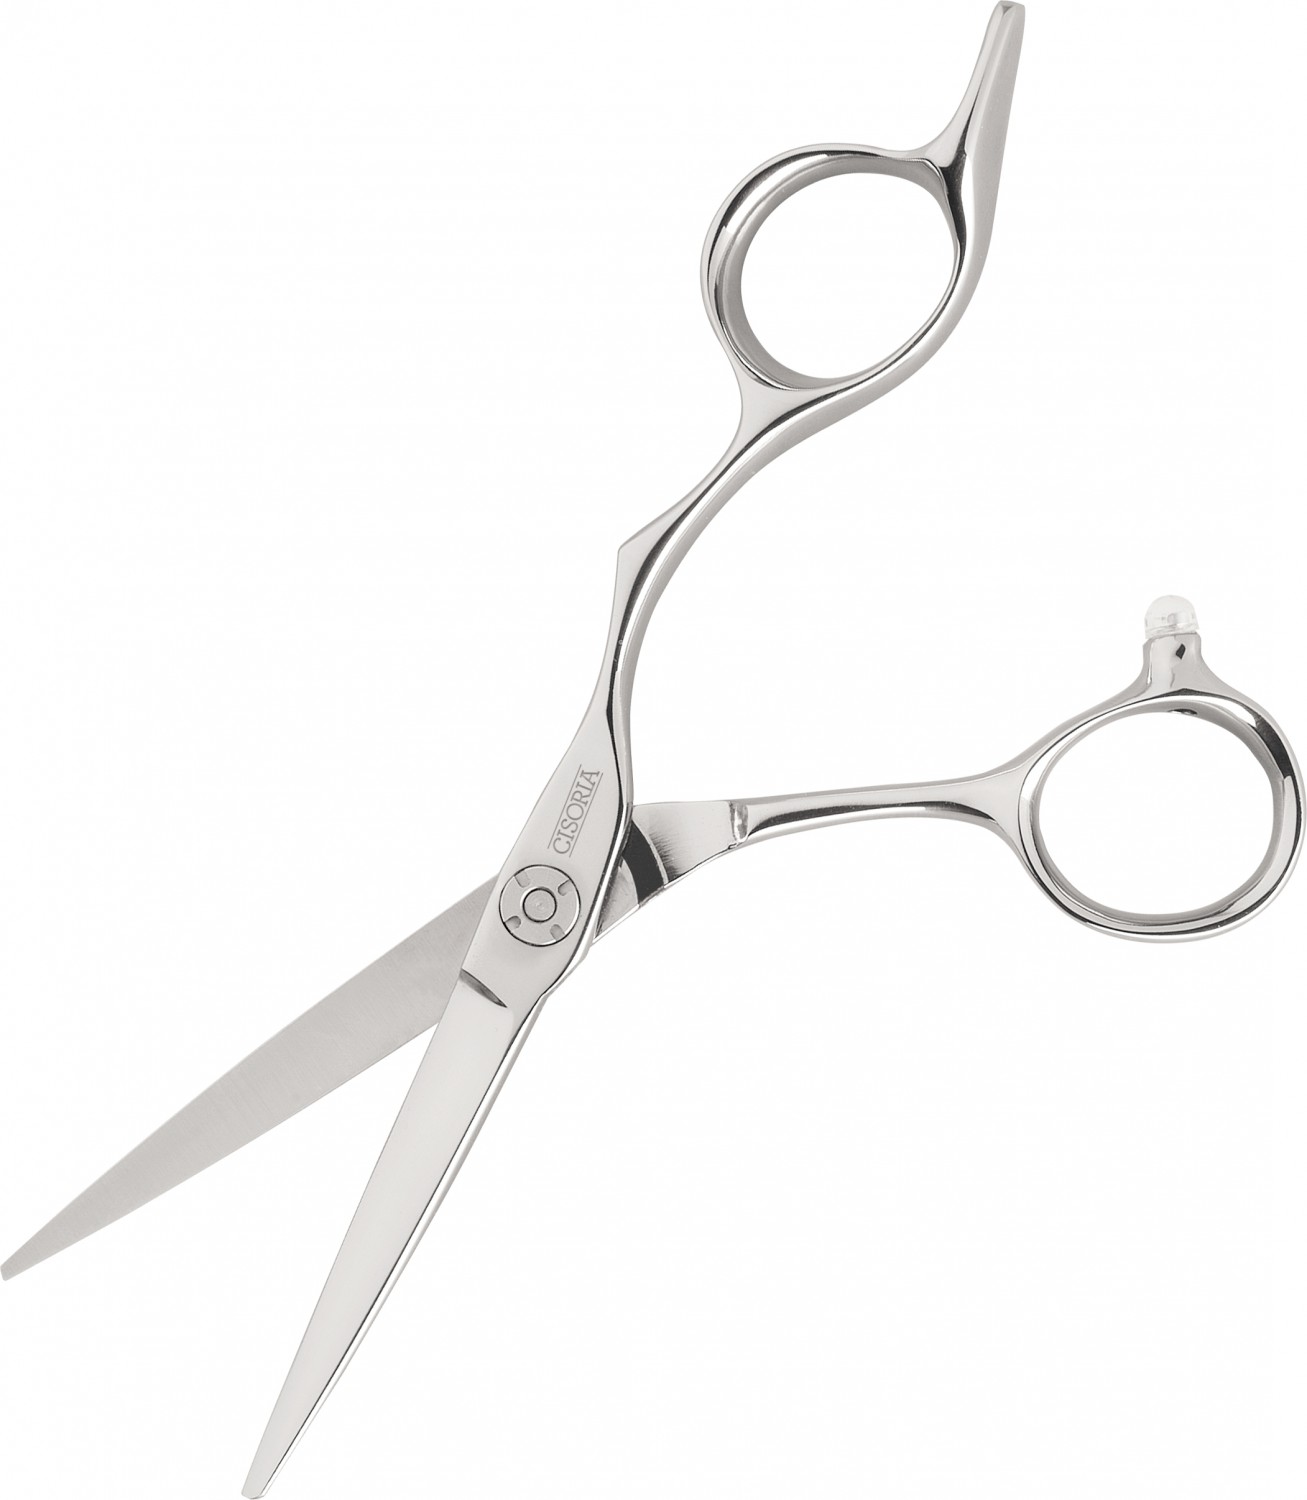  Cisoria Offset Cutting Scissors 6" OE600 by Sibel 